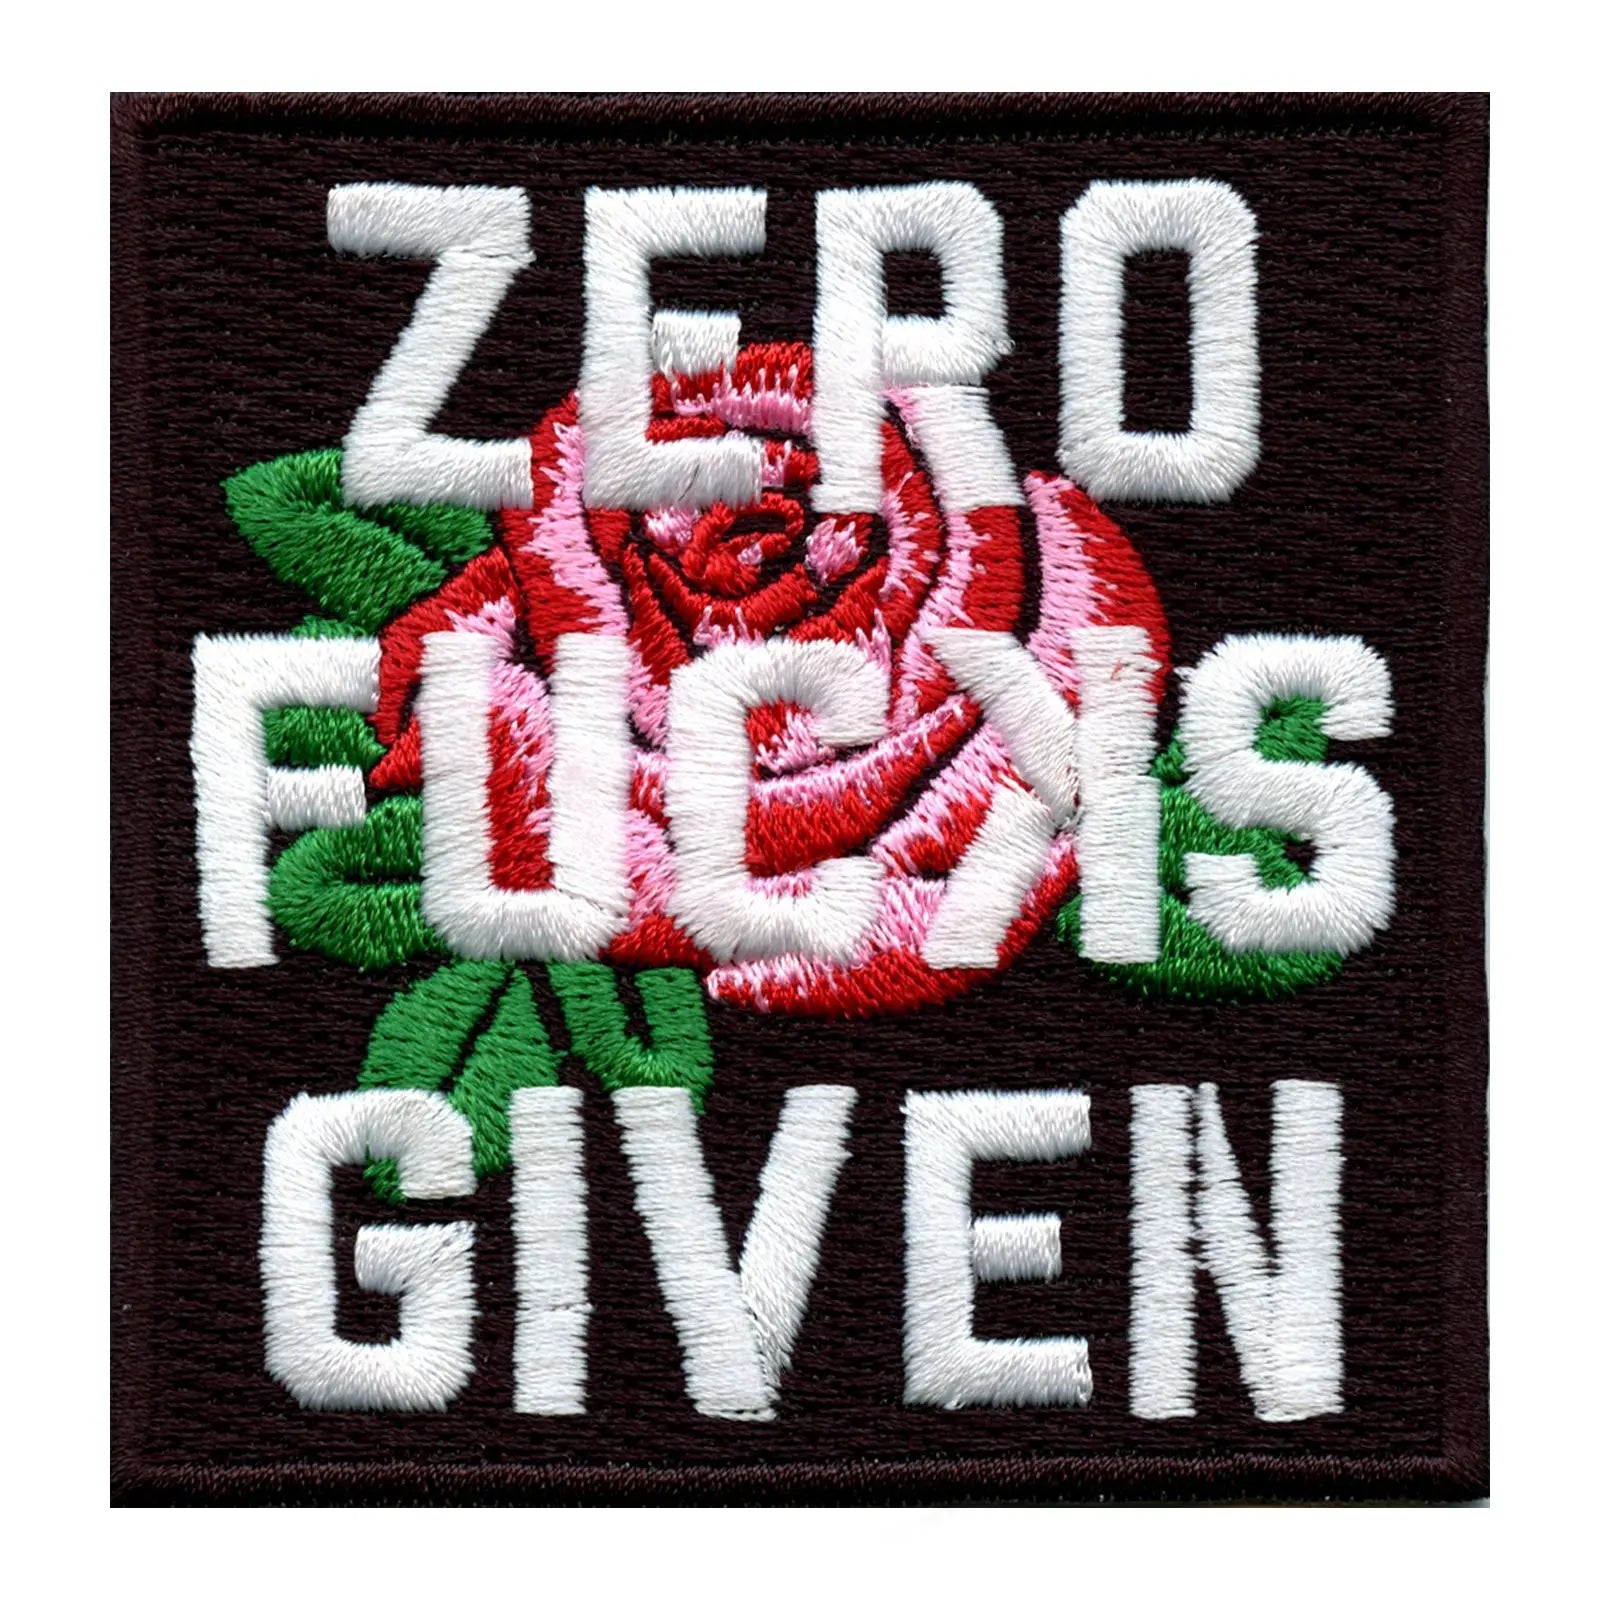 Zero F**ks Given With Rose Iron On Embroidered Patch 